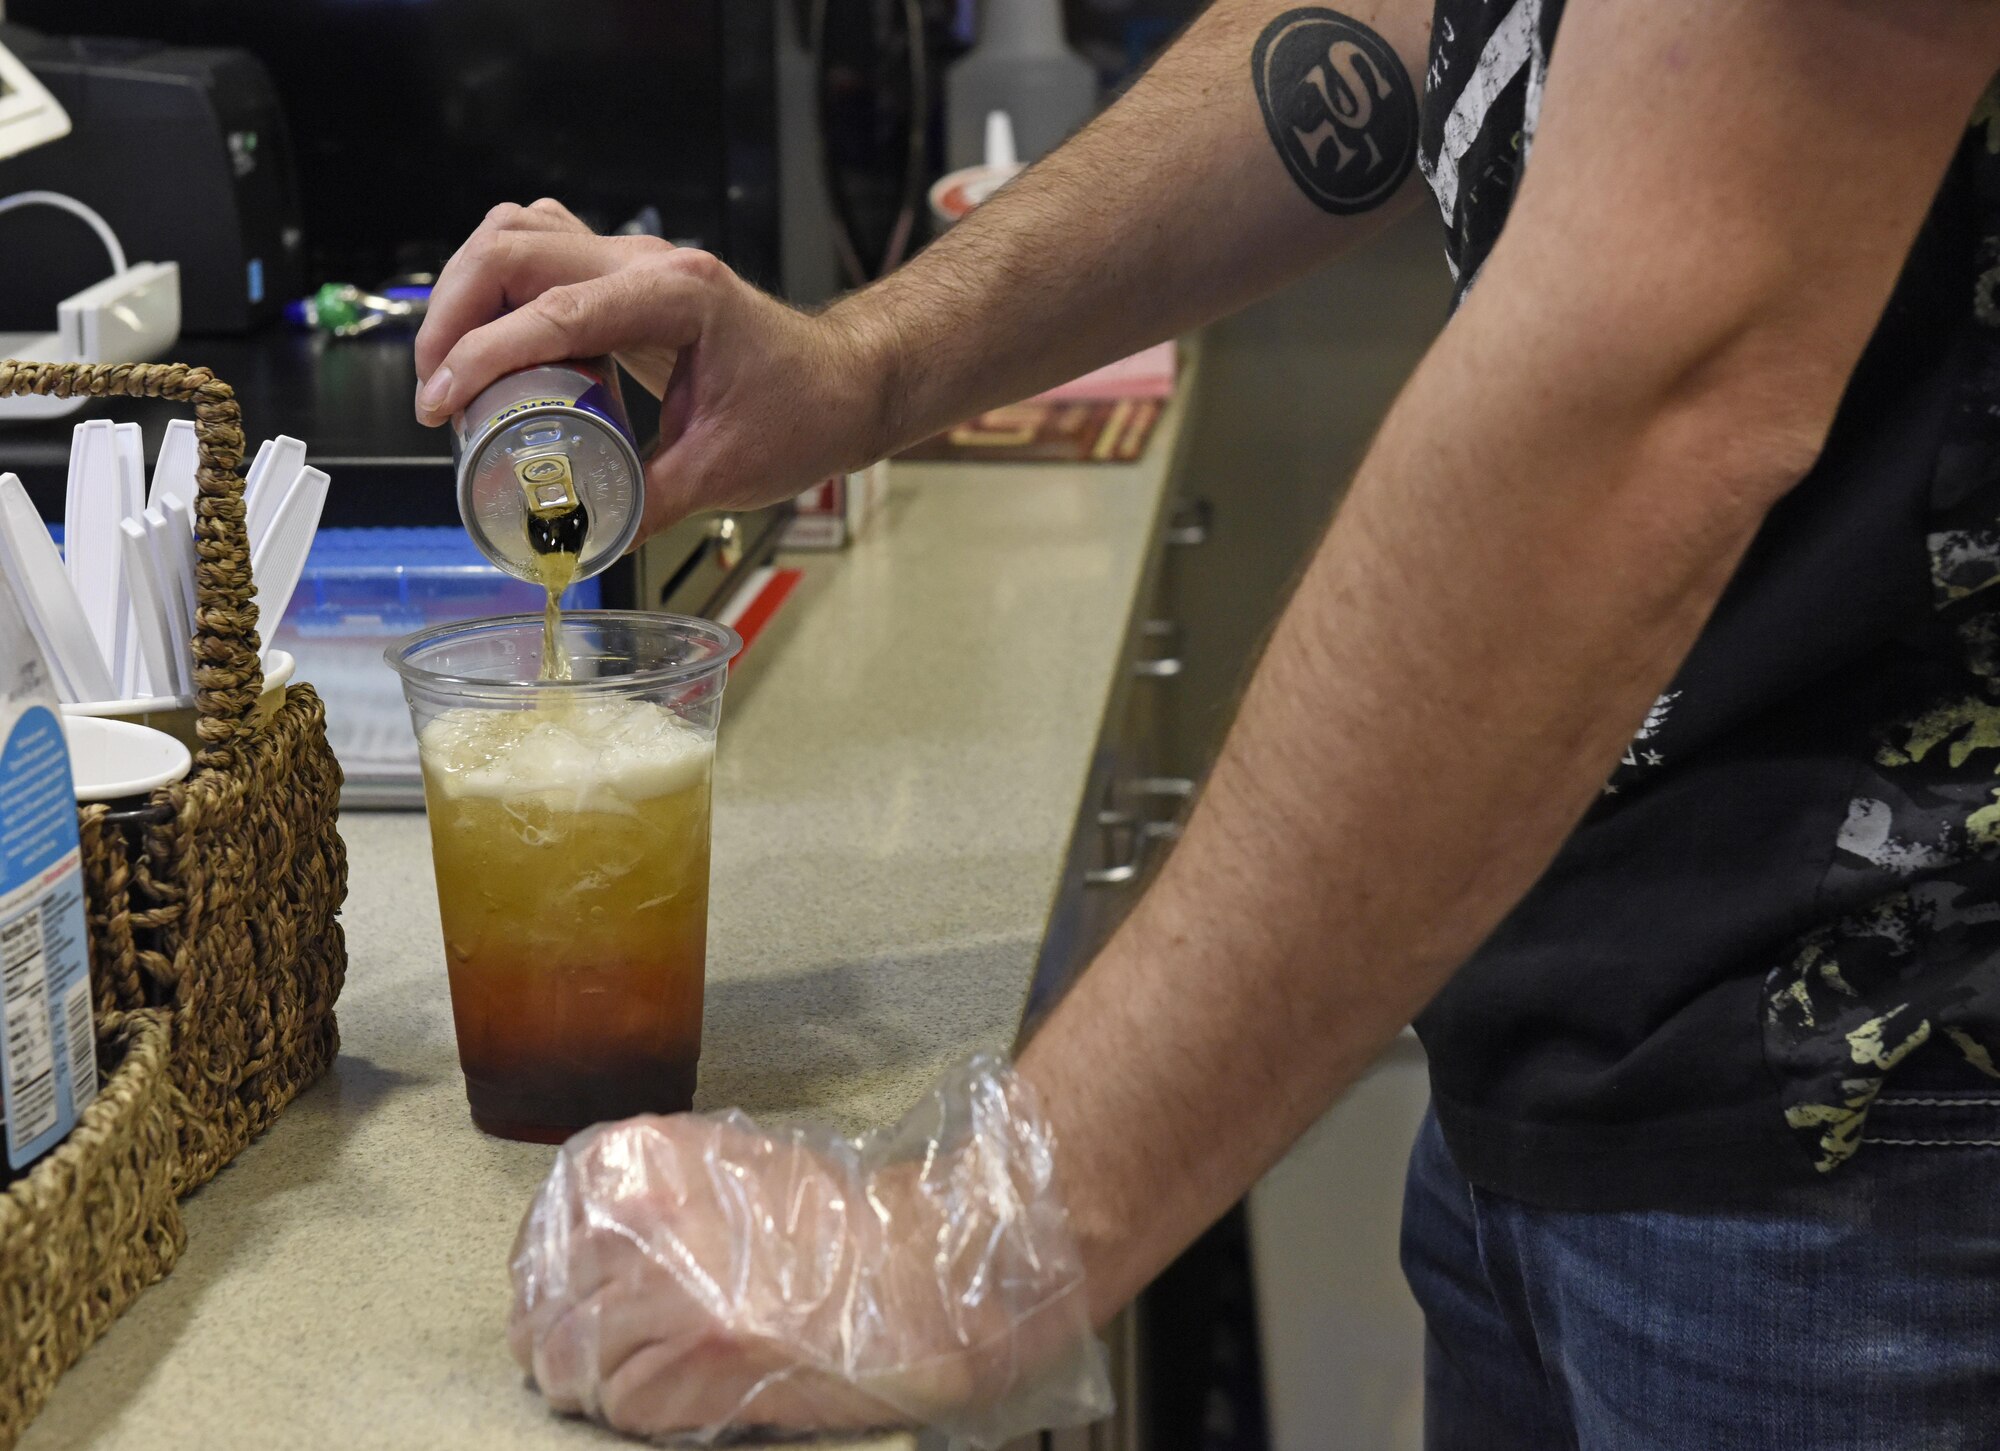 Larry Bowman, U.S. Air Force retiree and owner of the Coffee Corner, pours energy drink to a cold beverage at Fairchild Air Force Base, Wash., Sept. 26, 2017. Bawman said he has always had an entrepreneur mindset. He pursued an accounting degree using his GI Bill benefits, then invested in a coffee shop at Fairchild to fulfill his dream of being his own boss. (U.S. Air Force photo/Airman 1st Class Jesenia Landaverde)